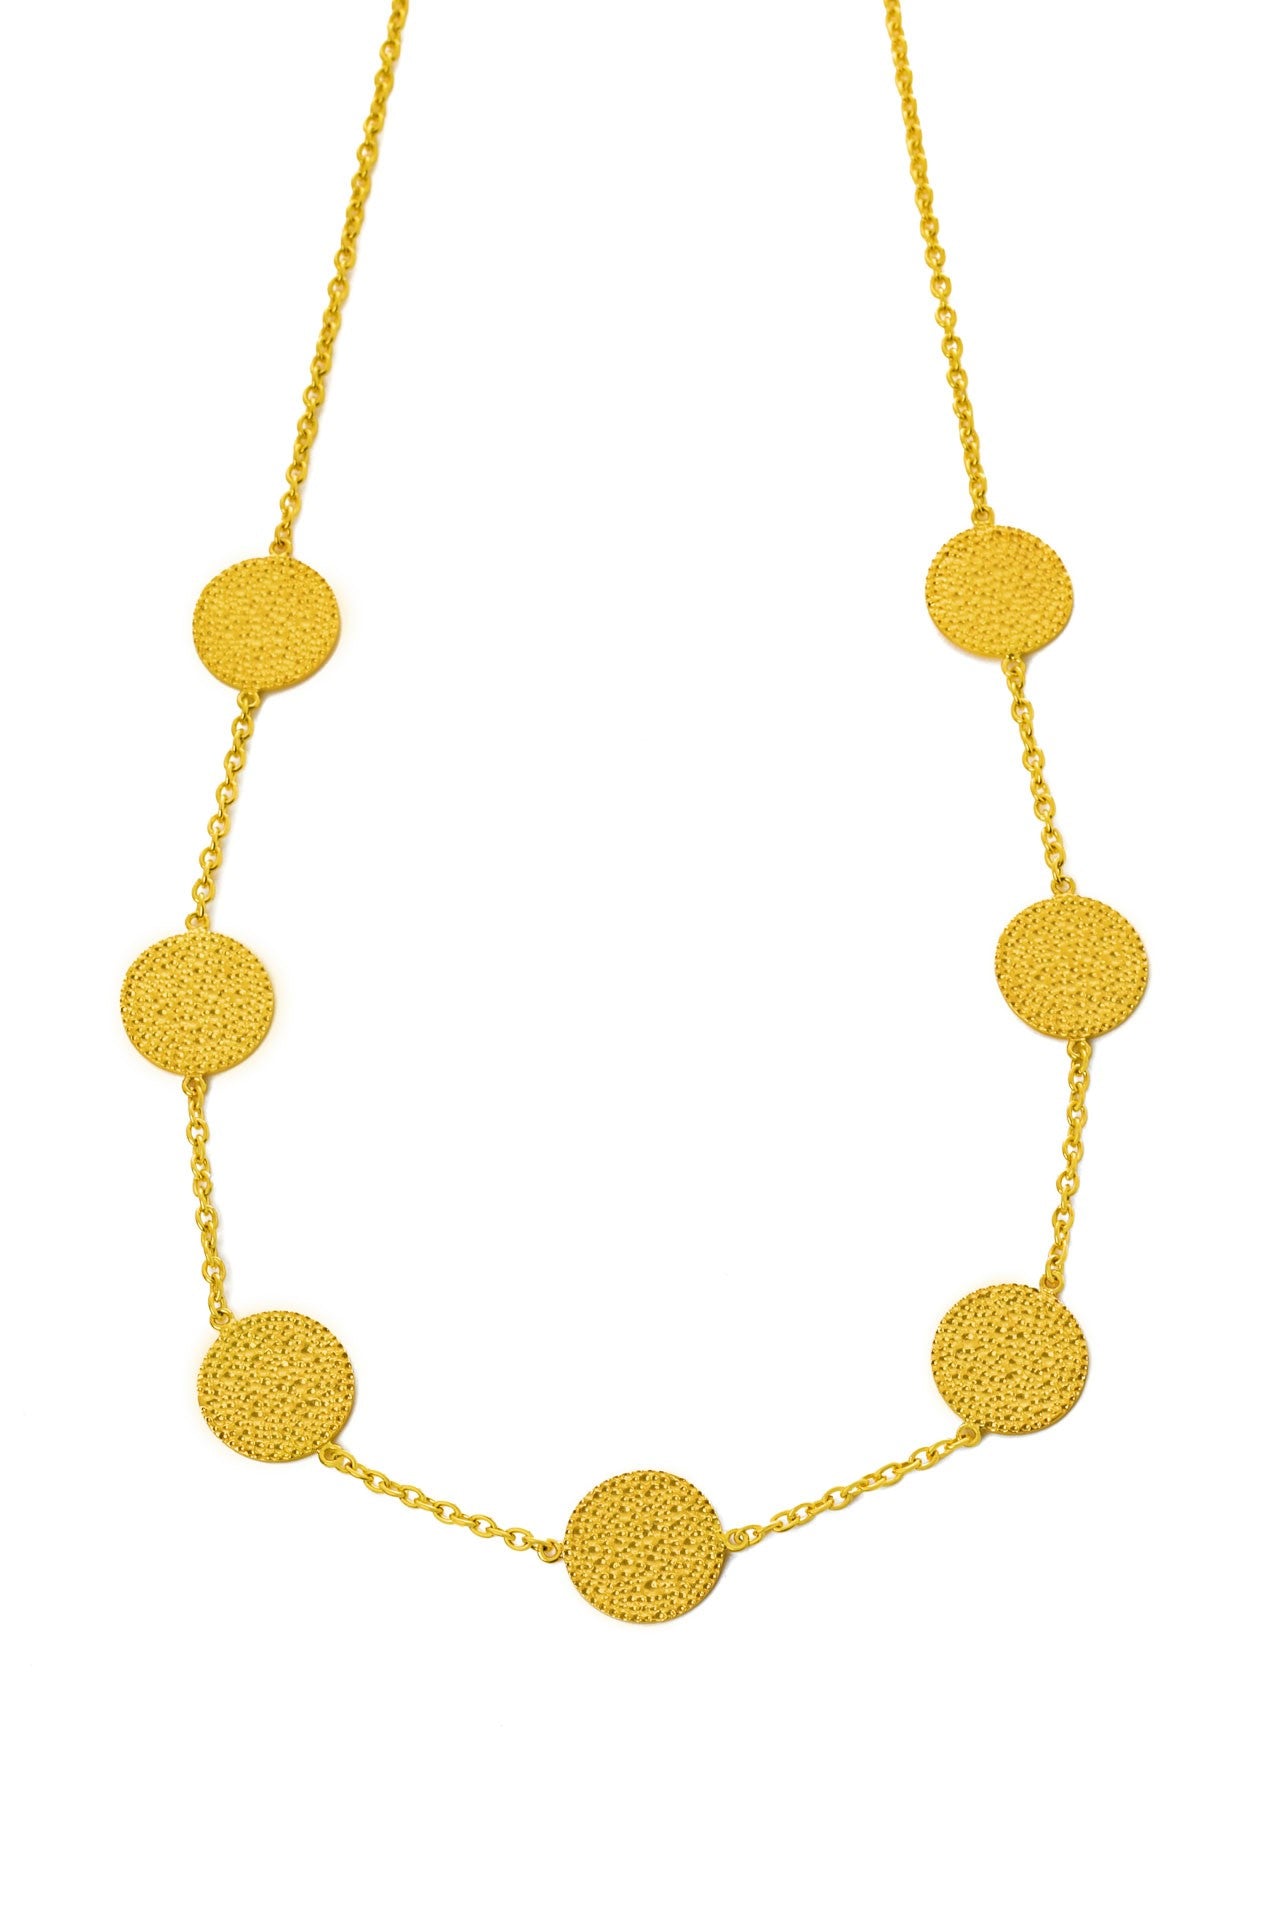 Gisele large necklace brass  by Pearl Martini